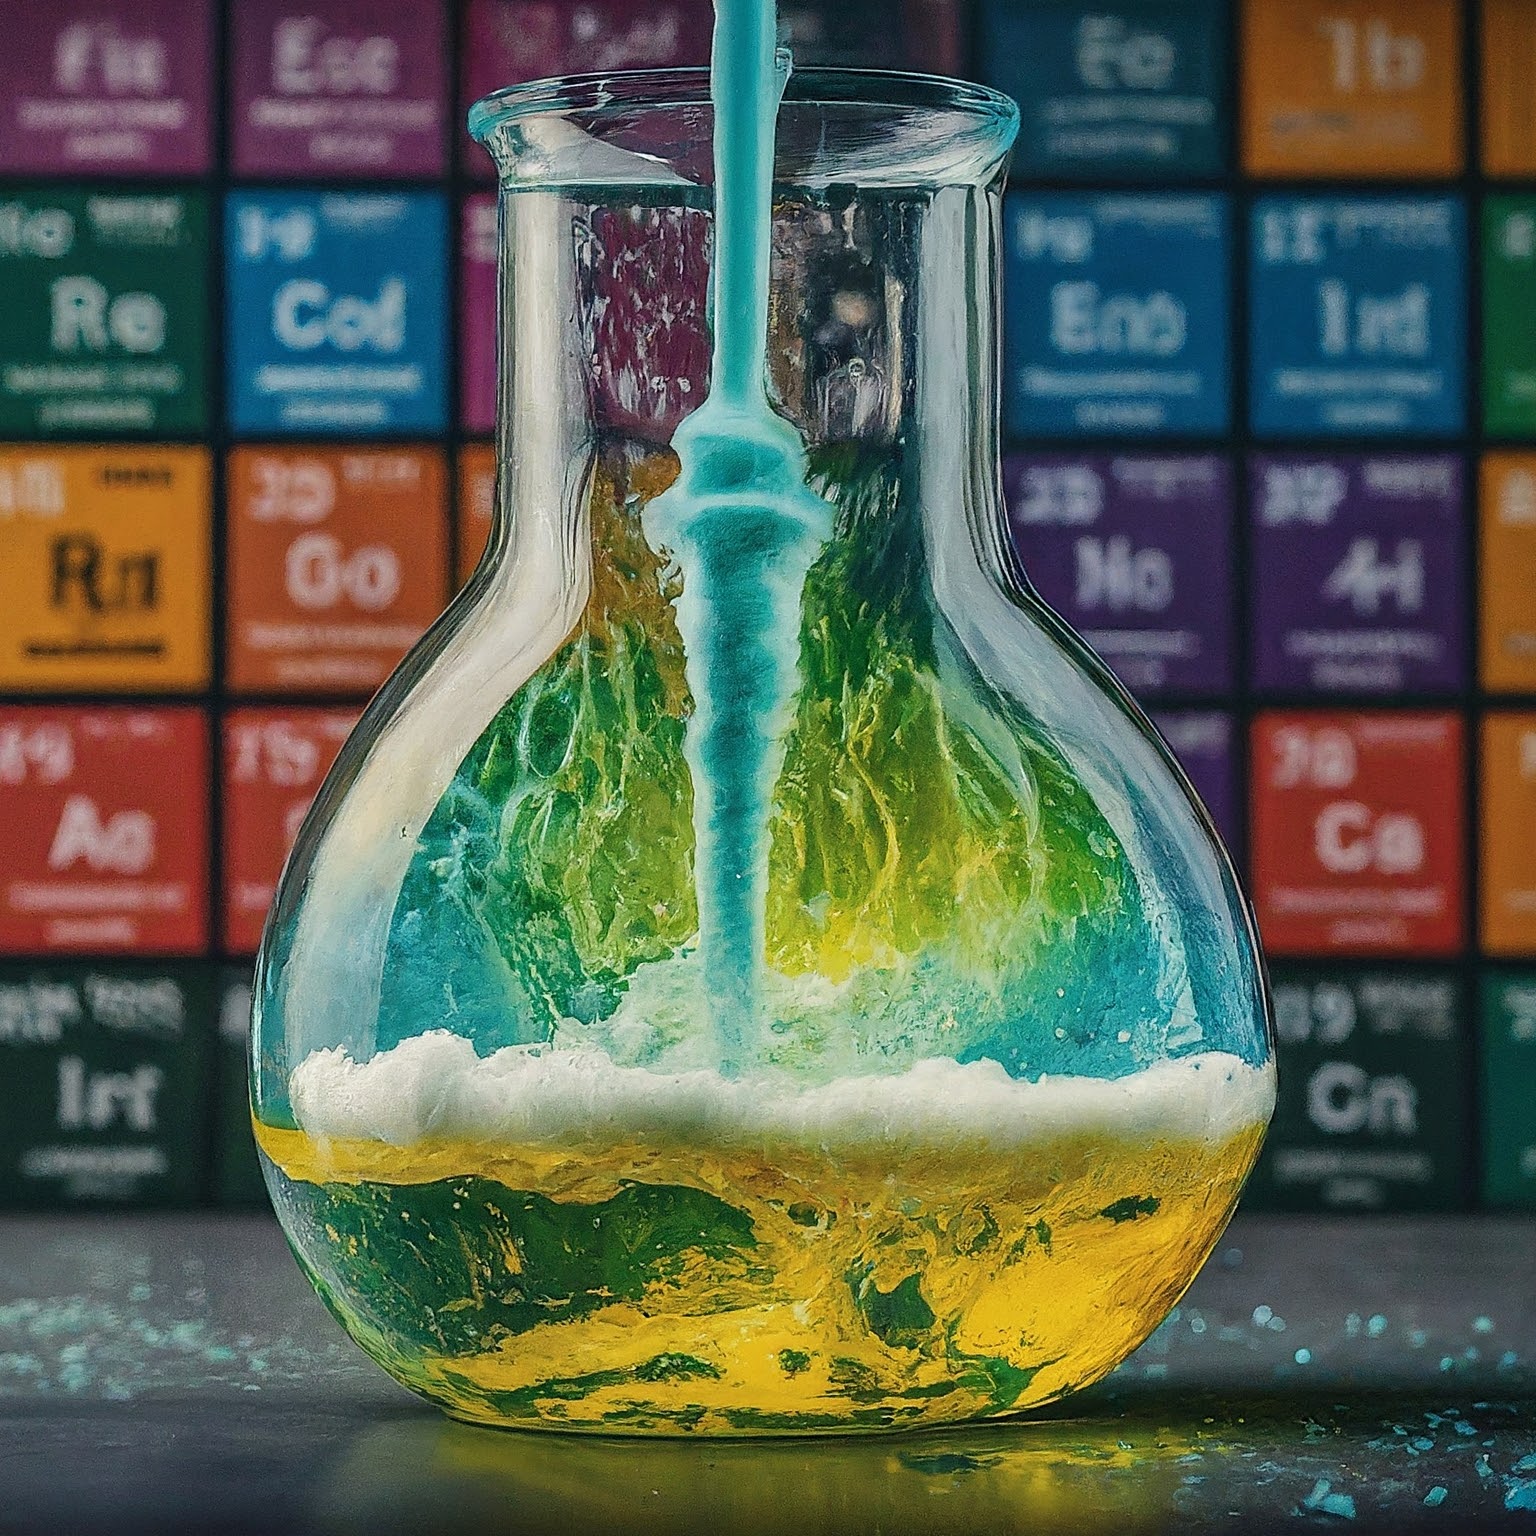 Important 500 Questions Of Chemistry part-2